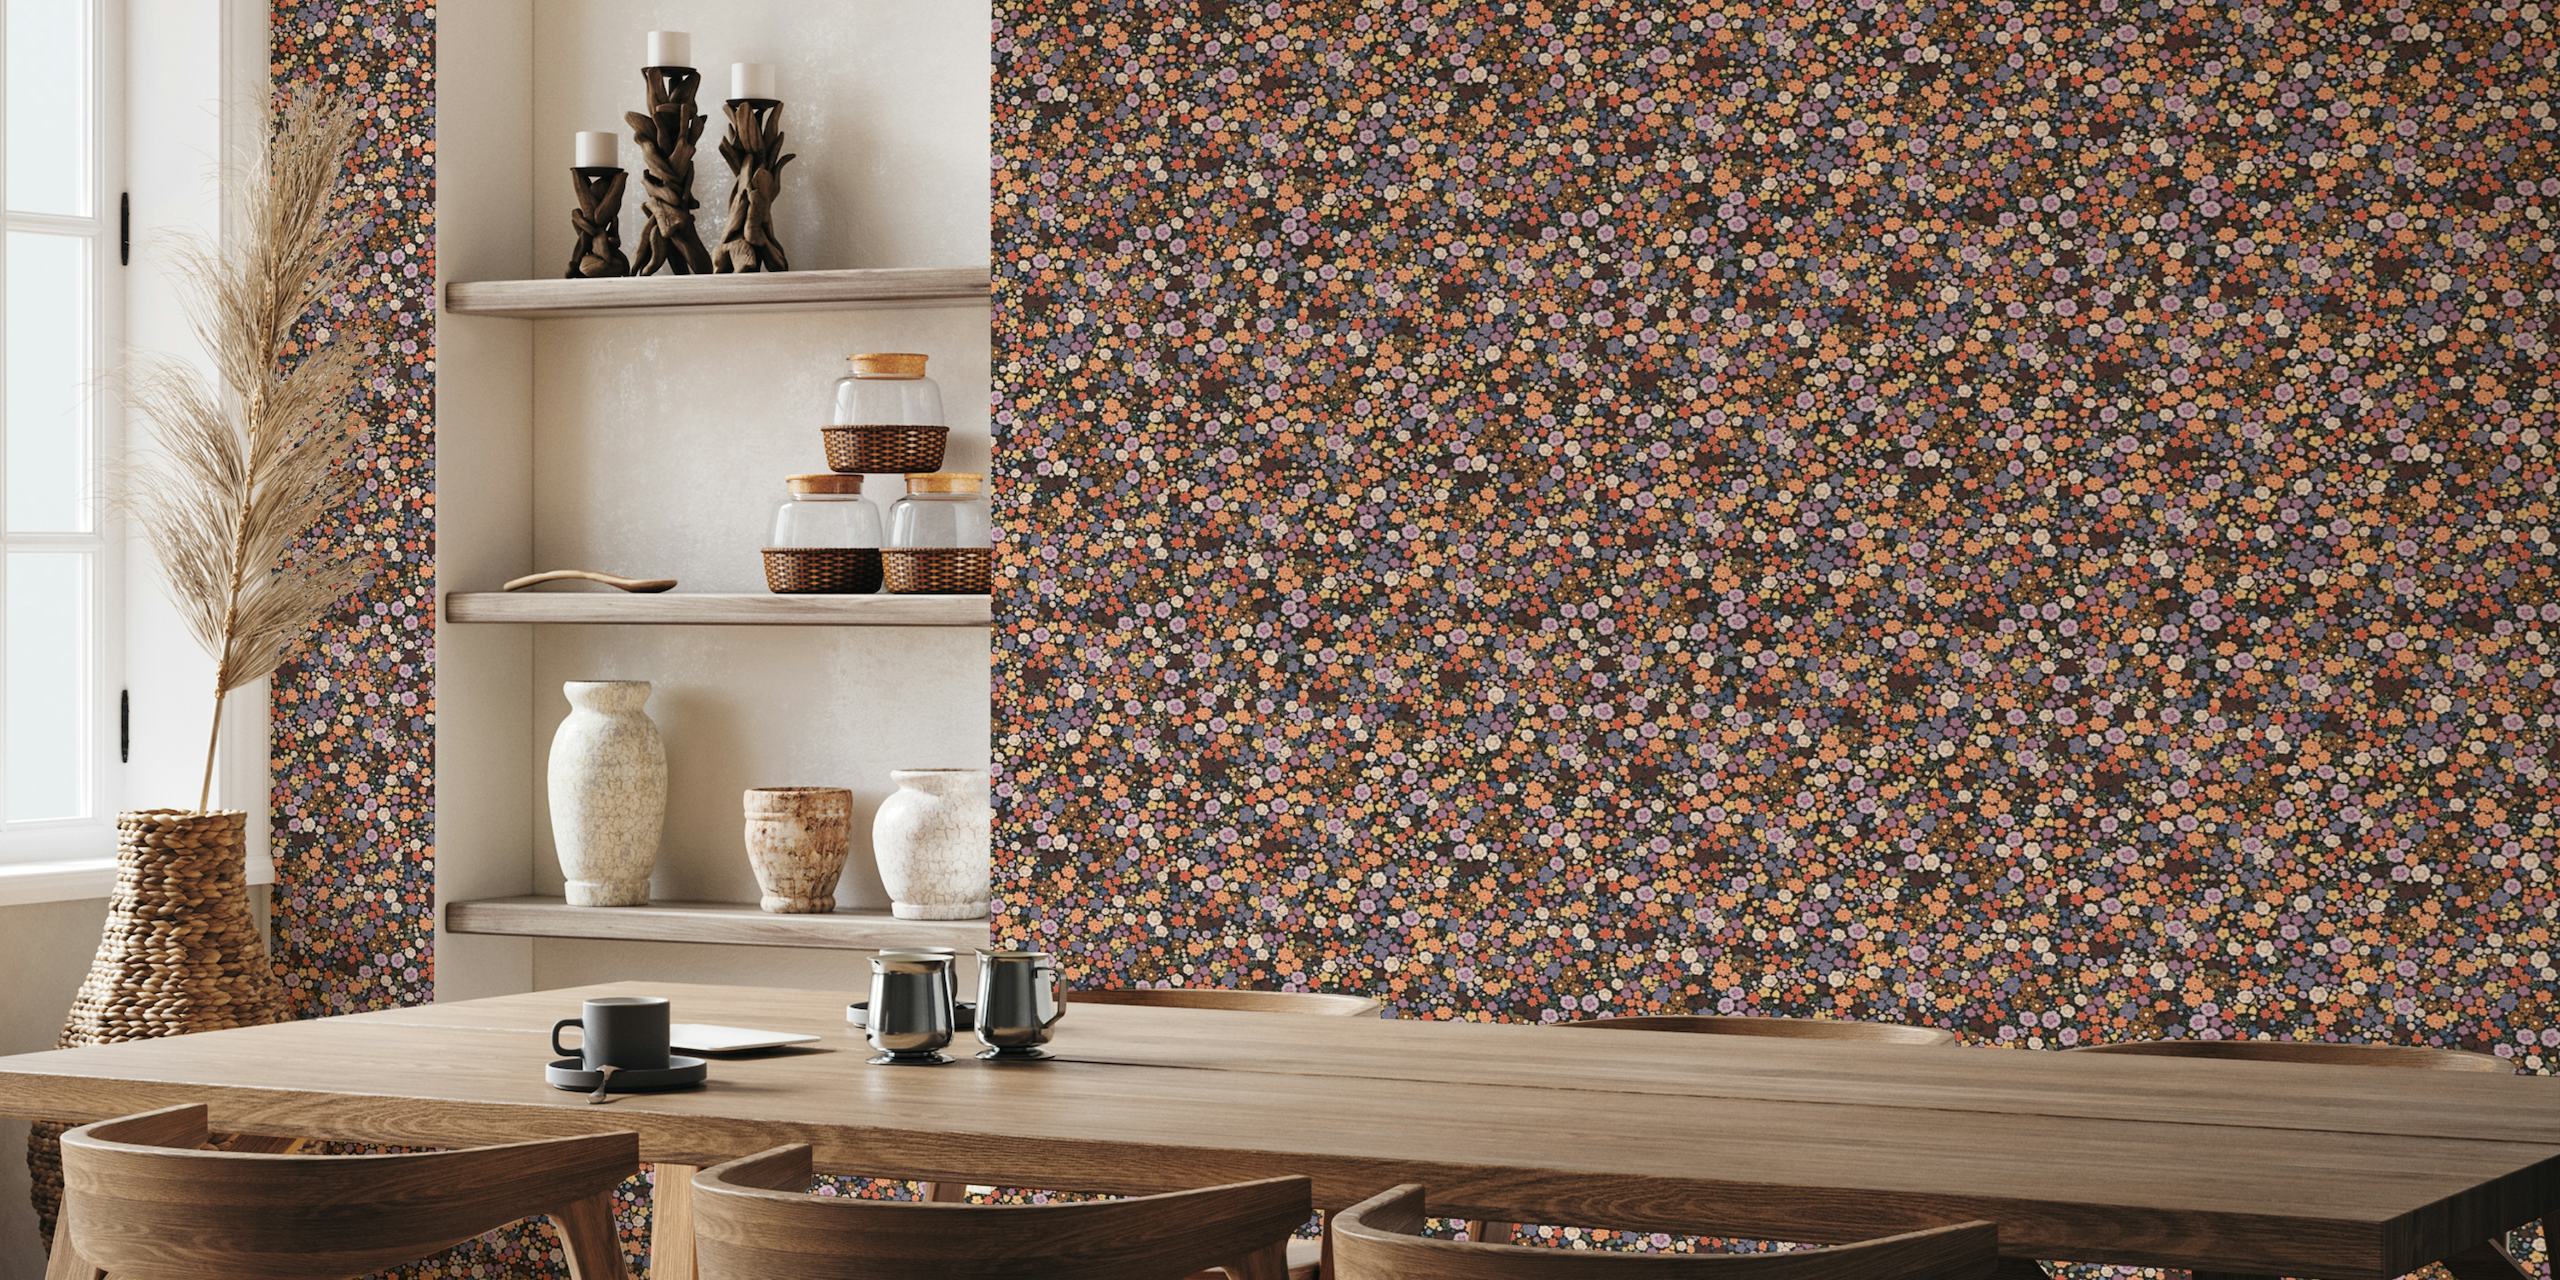 A ditsy floral pattern wall mural featuring a dense arrangement of small multicolored flowers.